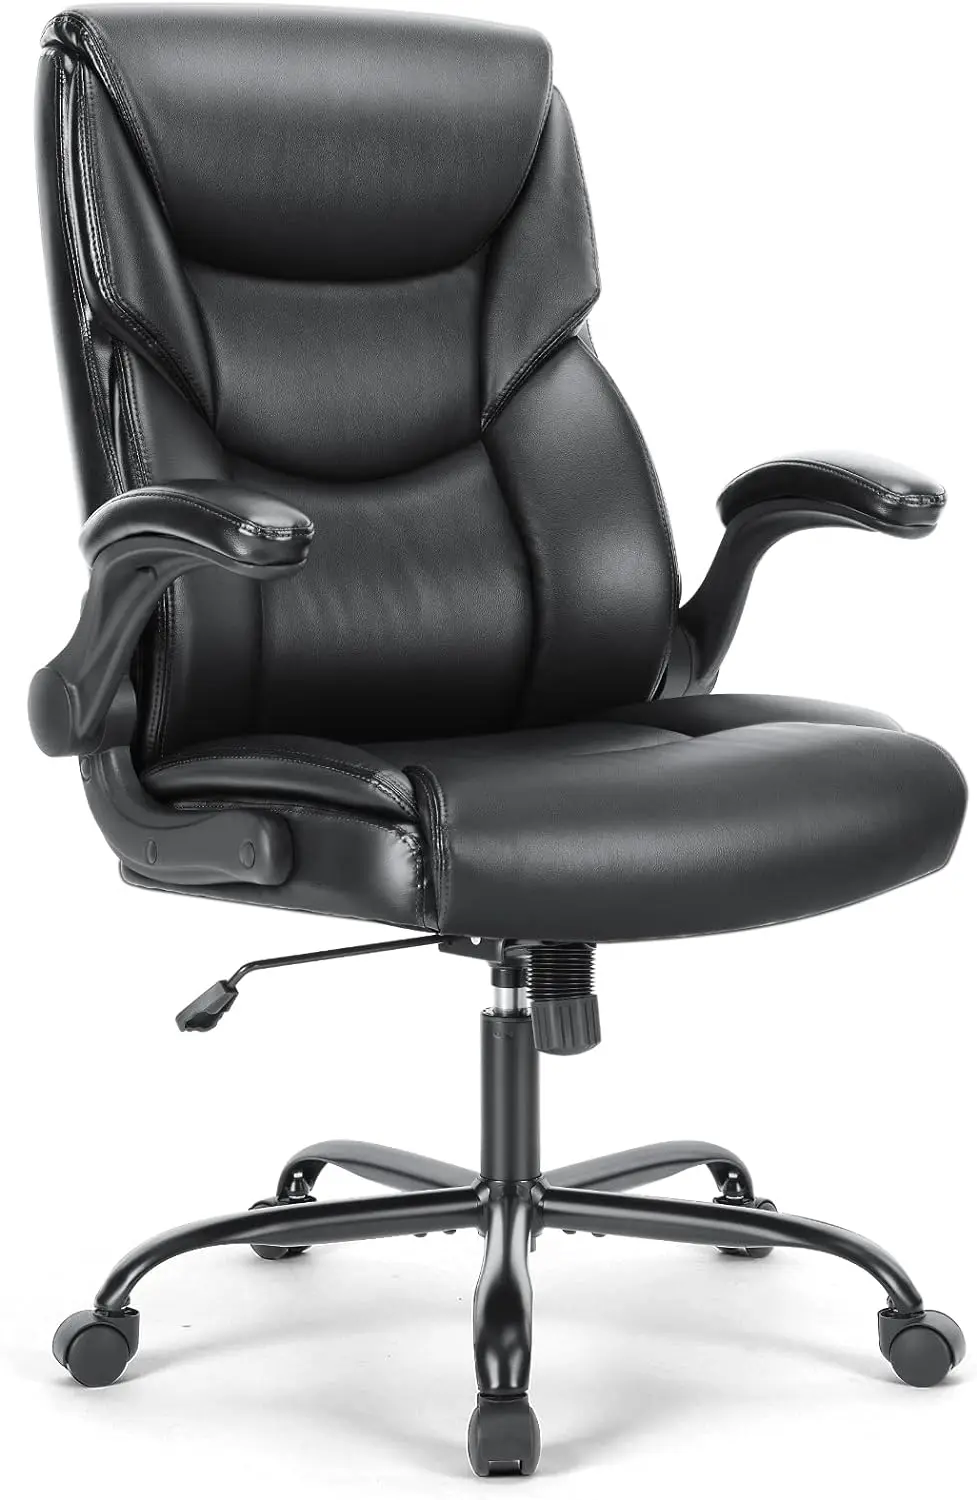 Home Office Chair-Big and Tall Chair for Office, High Back Ergonomic Executive Desk Chair, PU Leather Flip-Up Armrests Computer